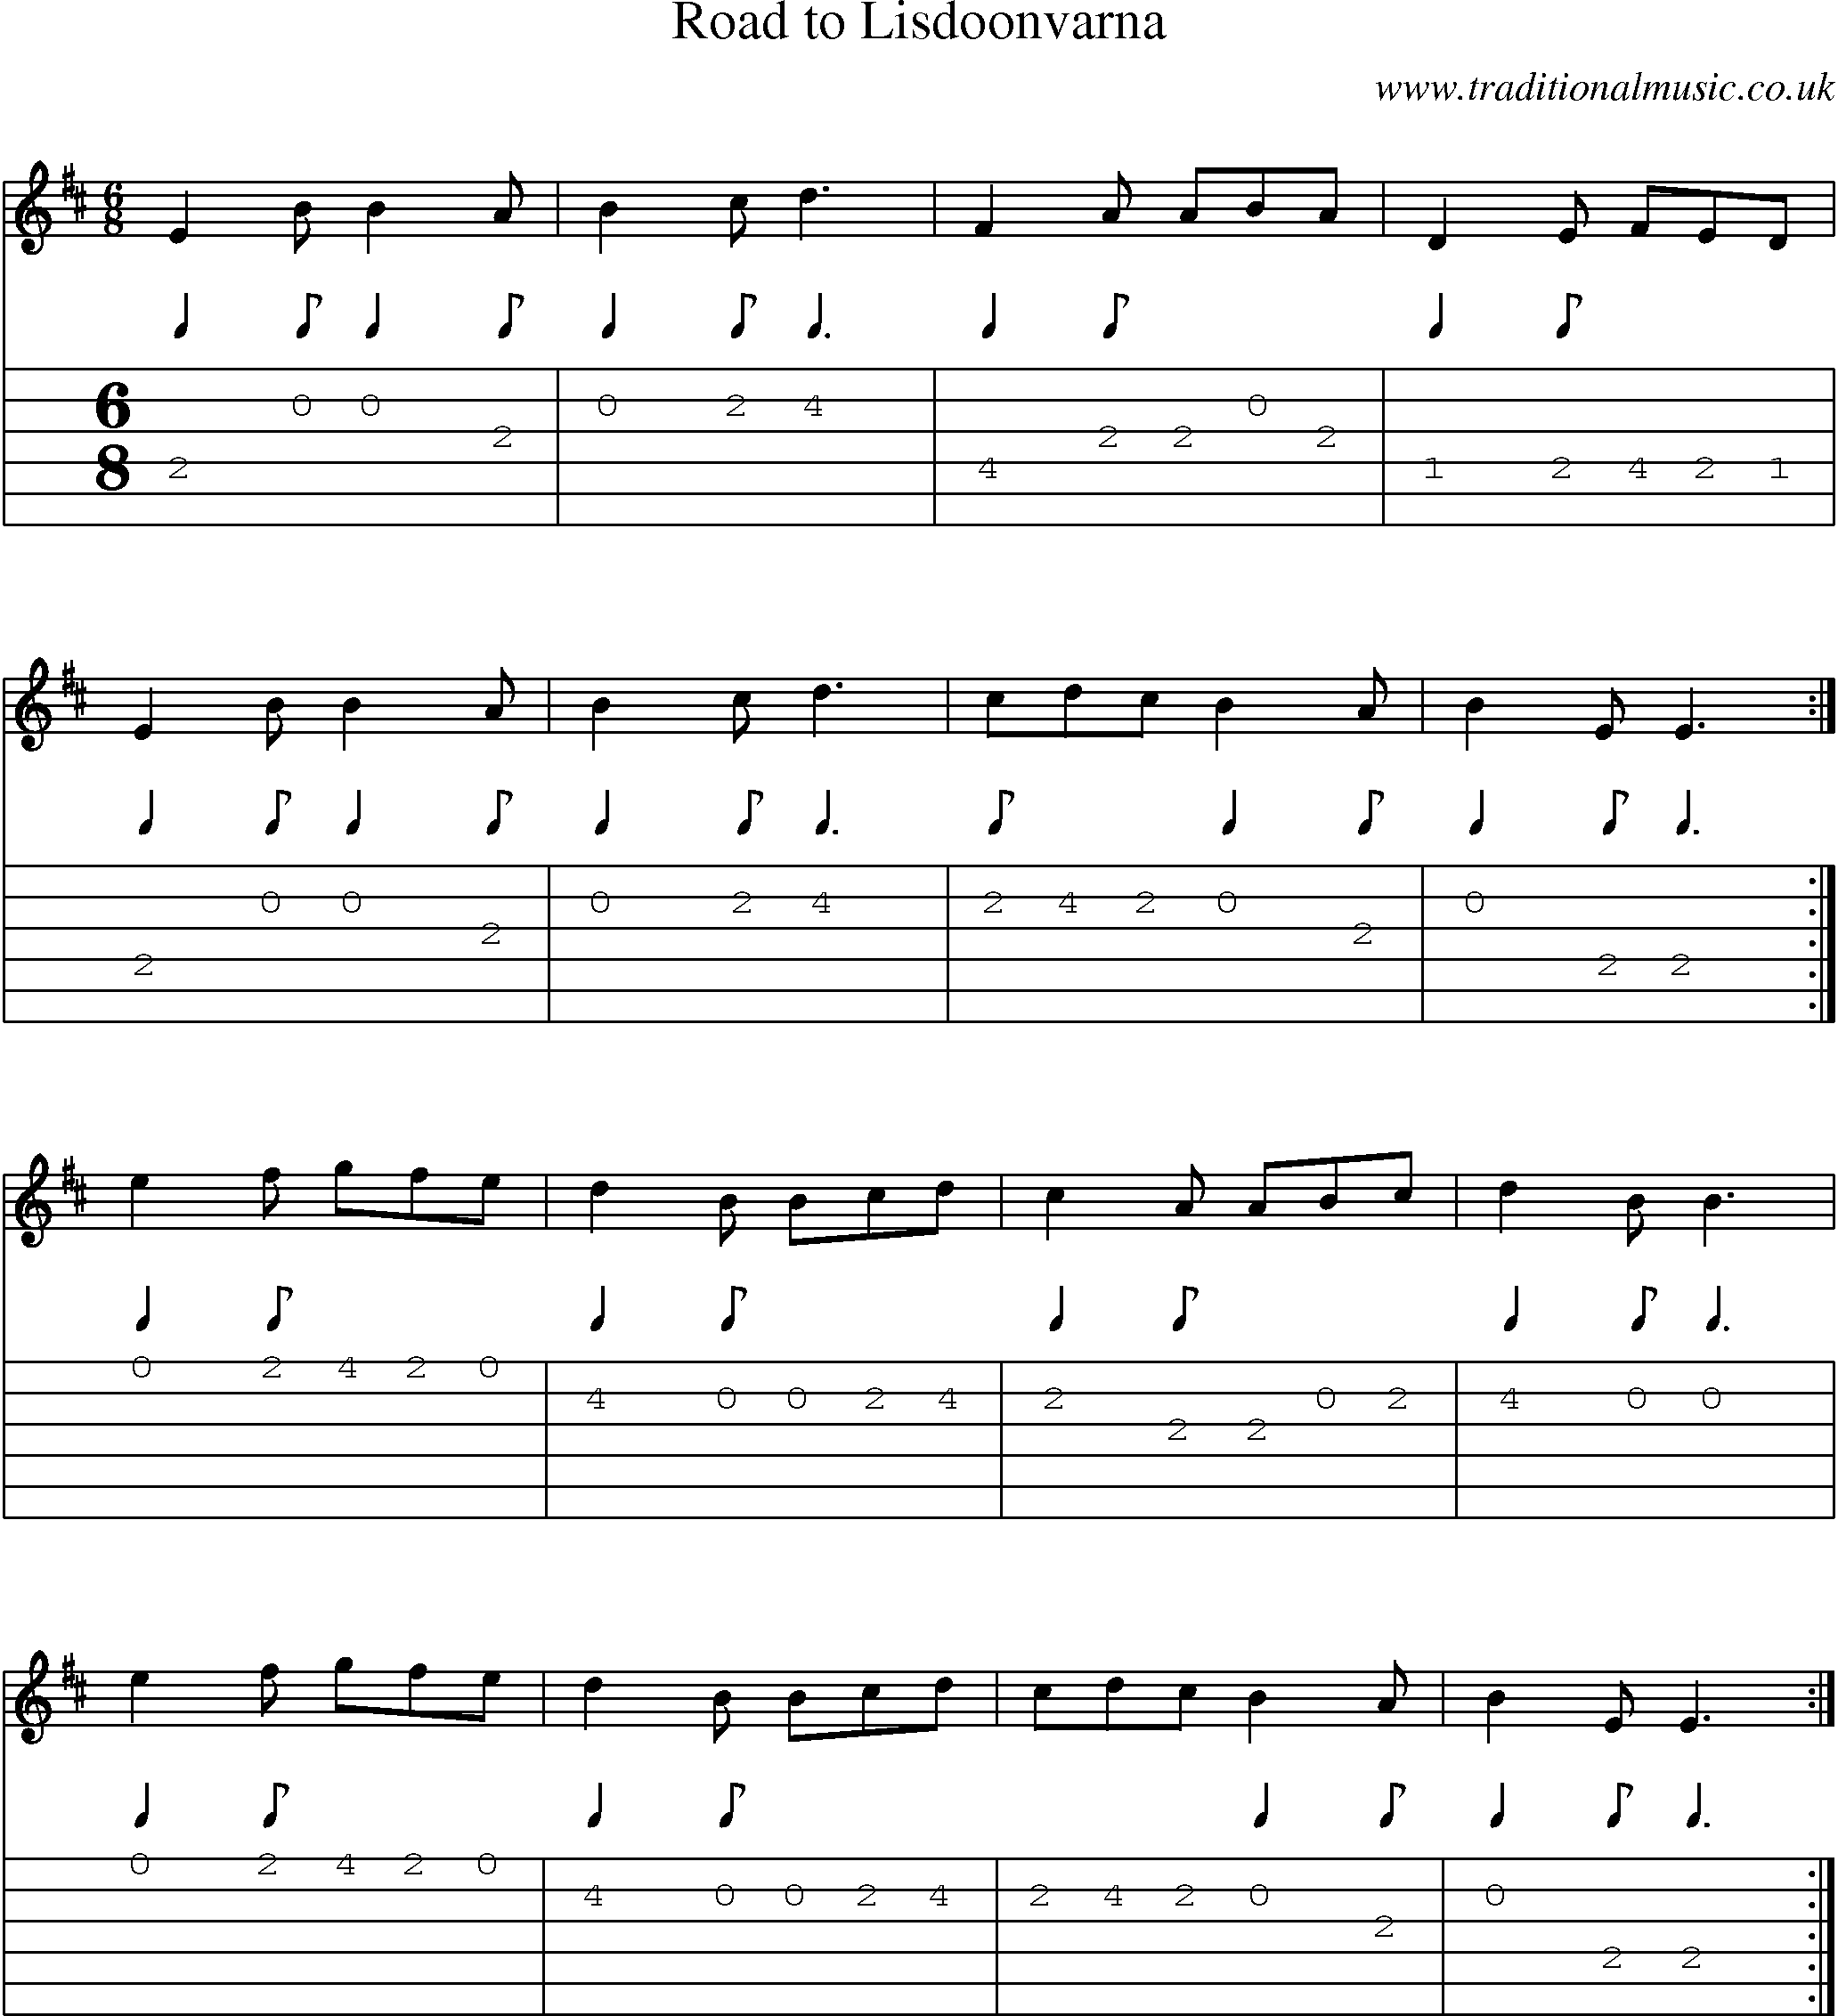 Music Score and Guitar Tabs for Road To Lisdoonvarna